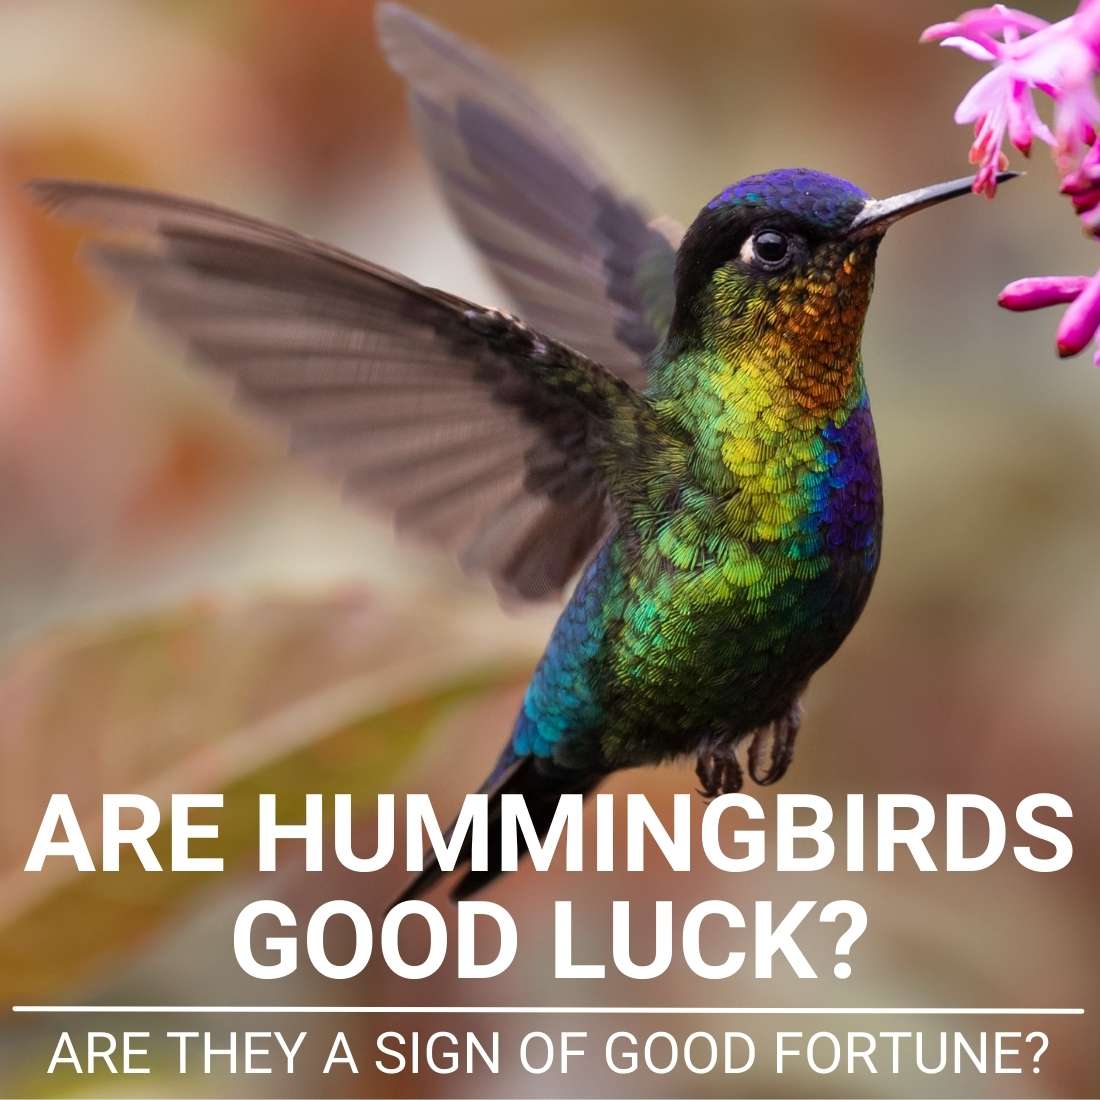 Are Hummingbirds Good Luck? - What Do Hummingbird Visits Mean?